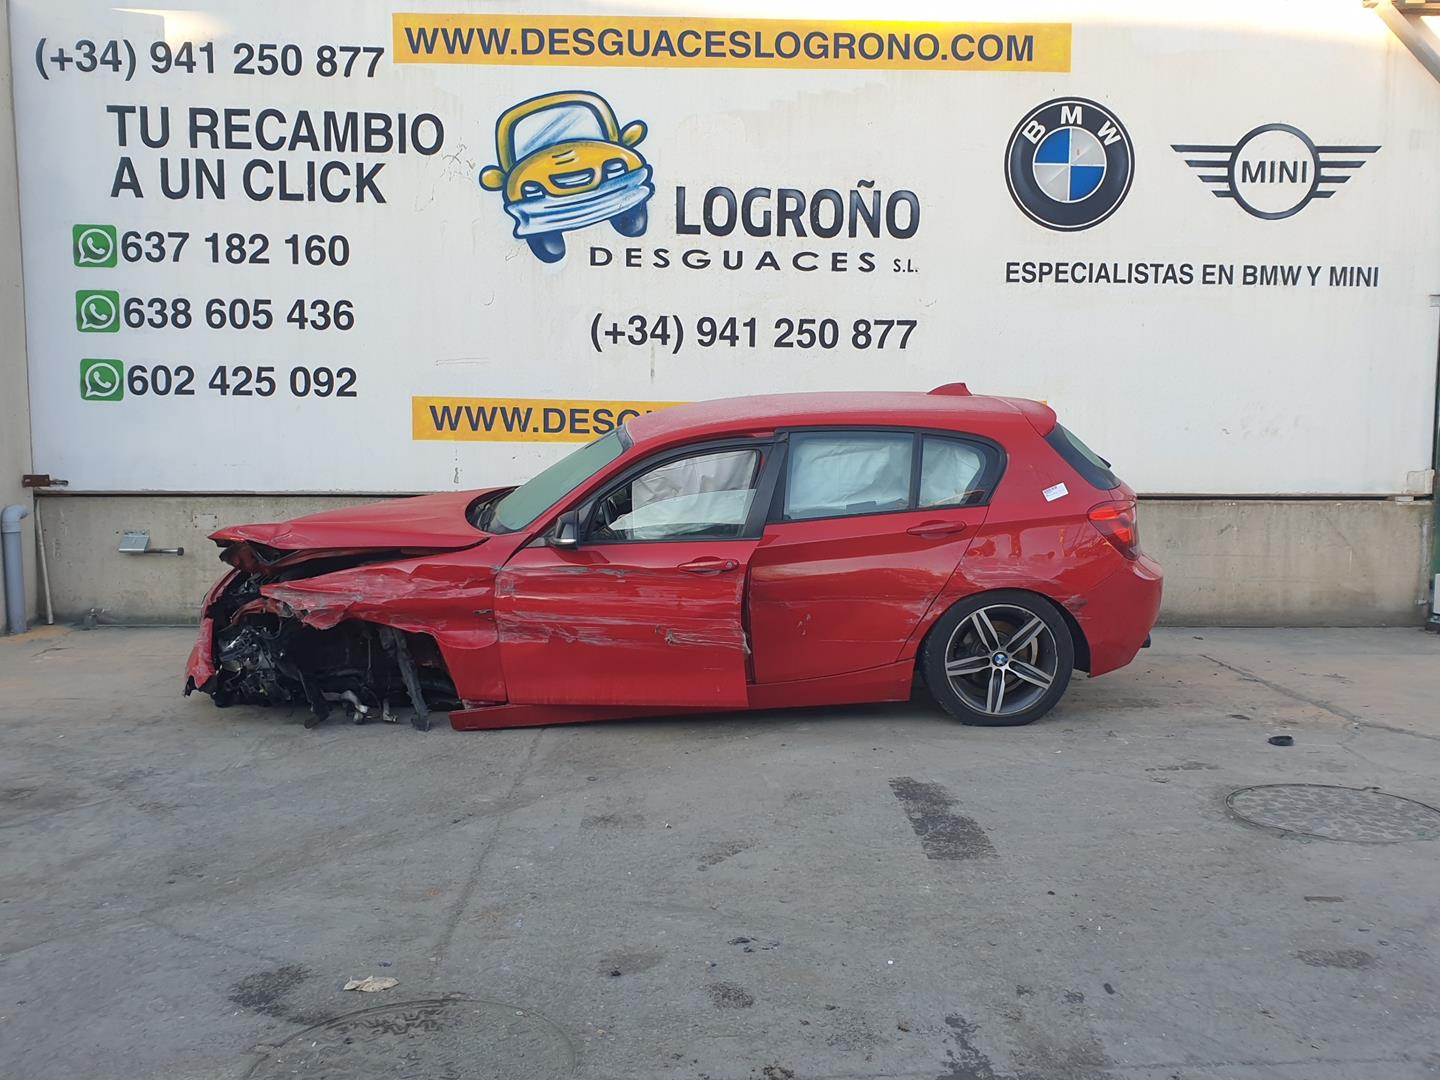 BMW 1 Series F20/F21 (2011-2020) Other Body Parts 51247248535, 7270728, 2222DL 19750186